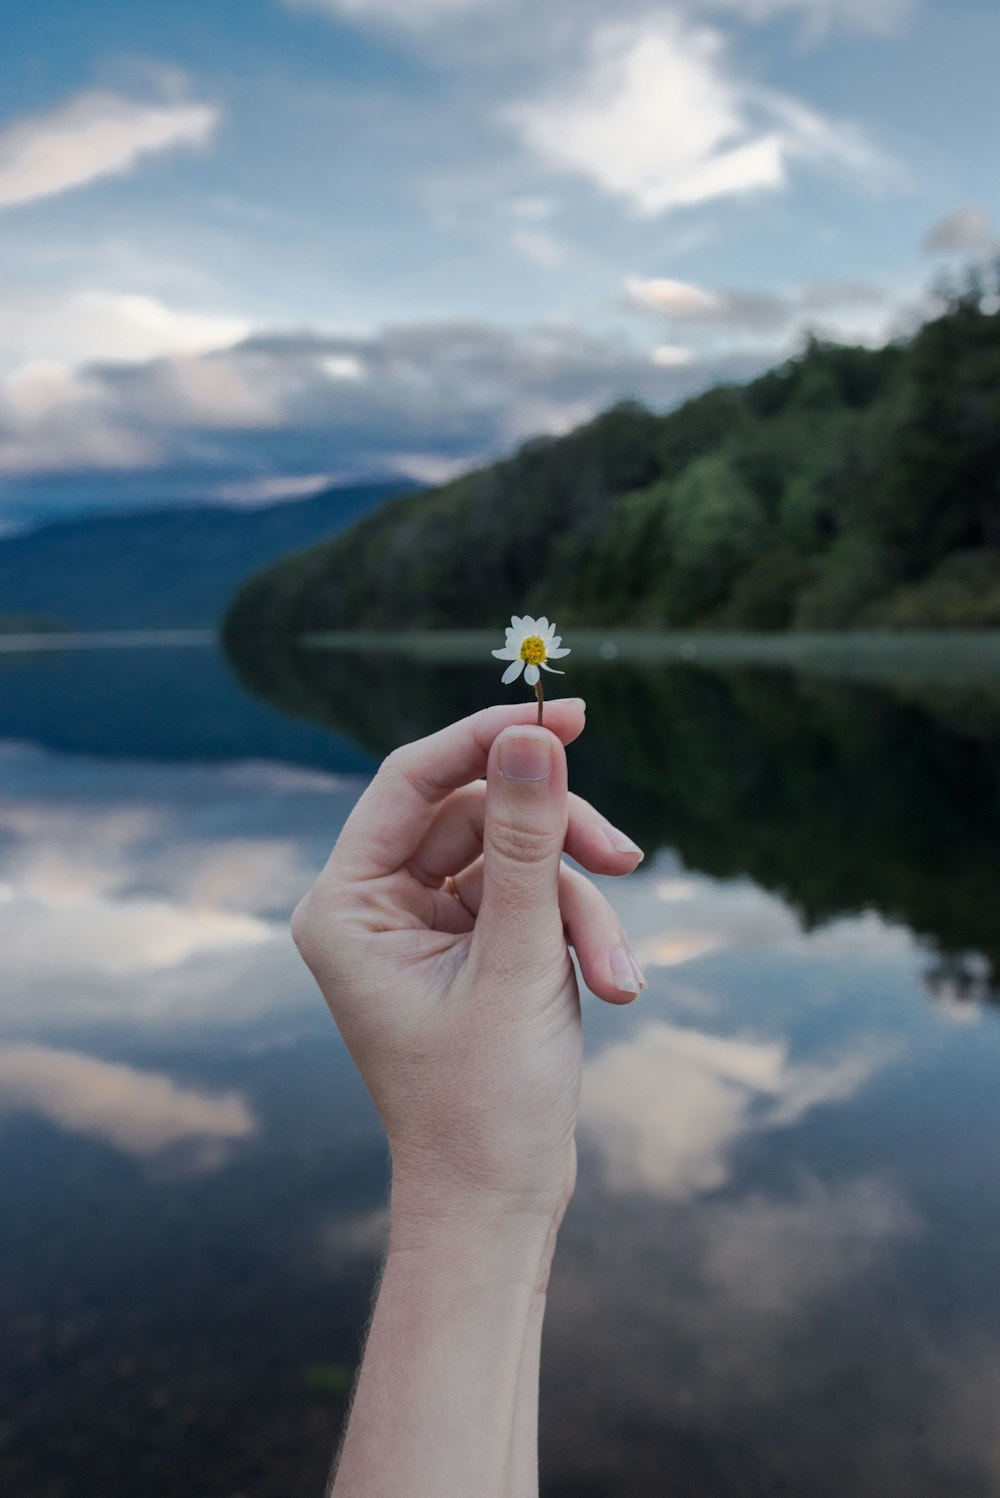 a person's hand holding a small flower over a body of water